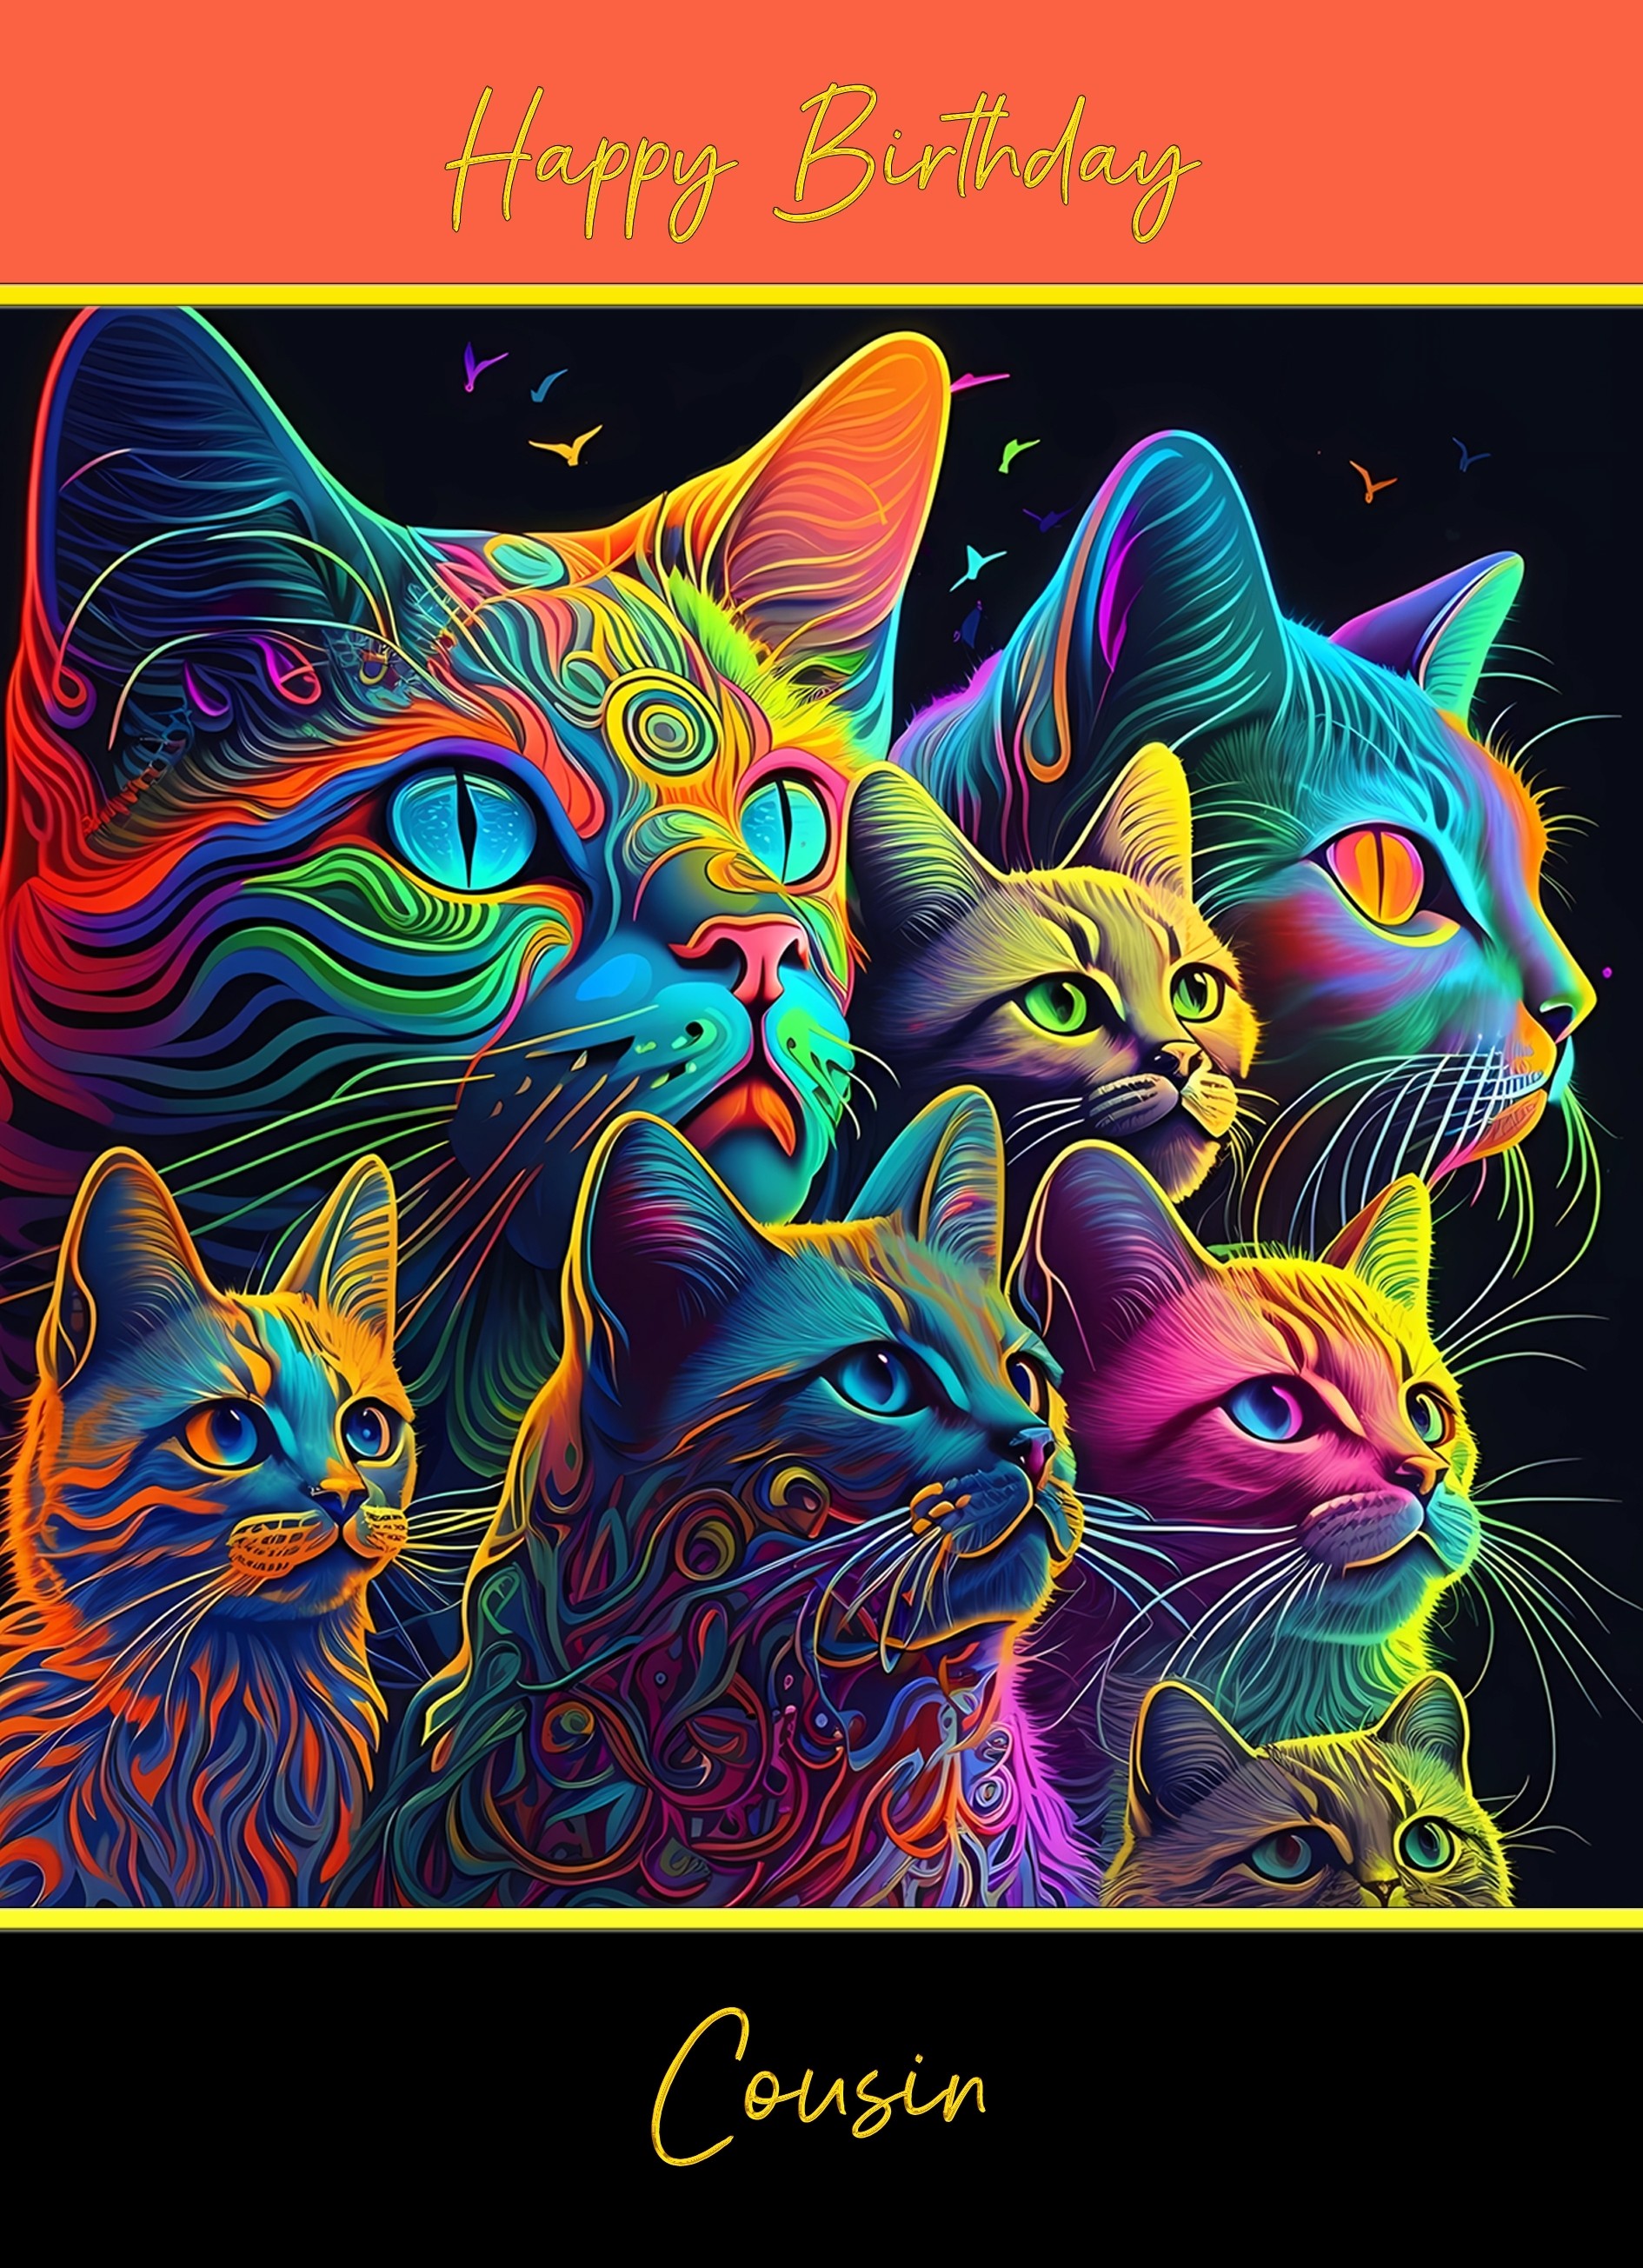 Birthday Card For Cousin (Colourful Cat Art, Design 2)